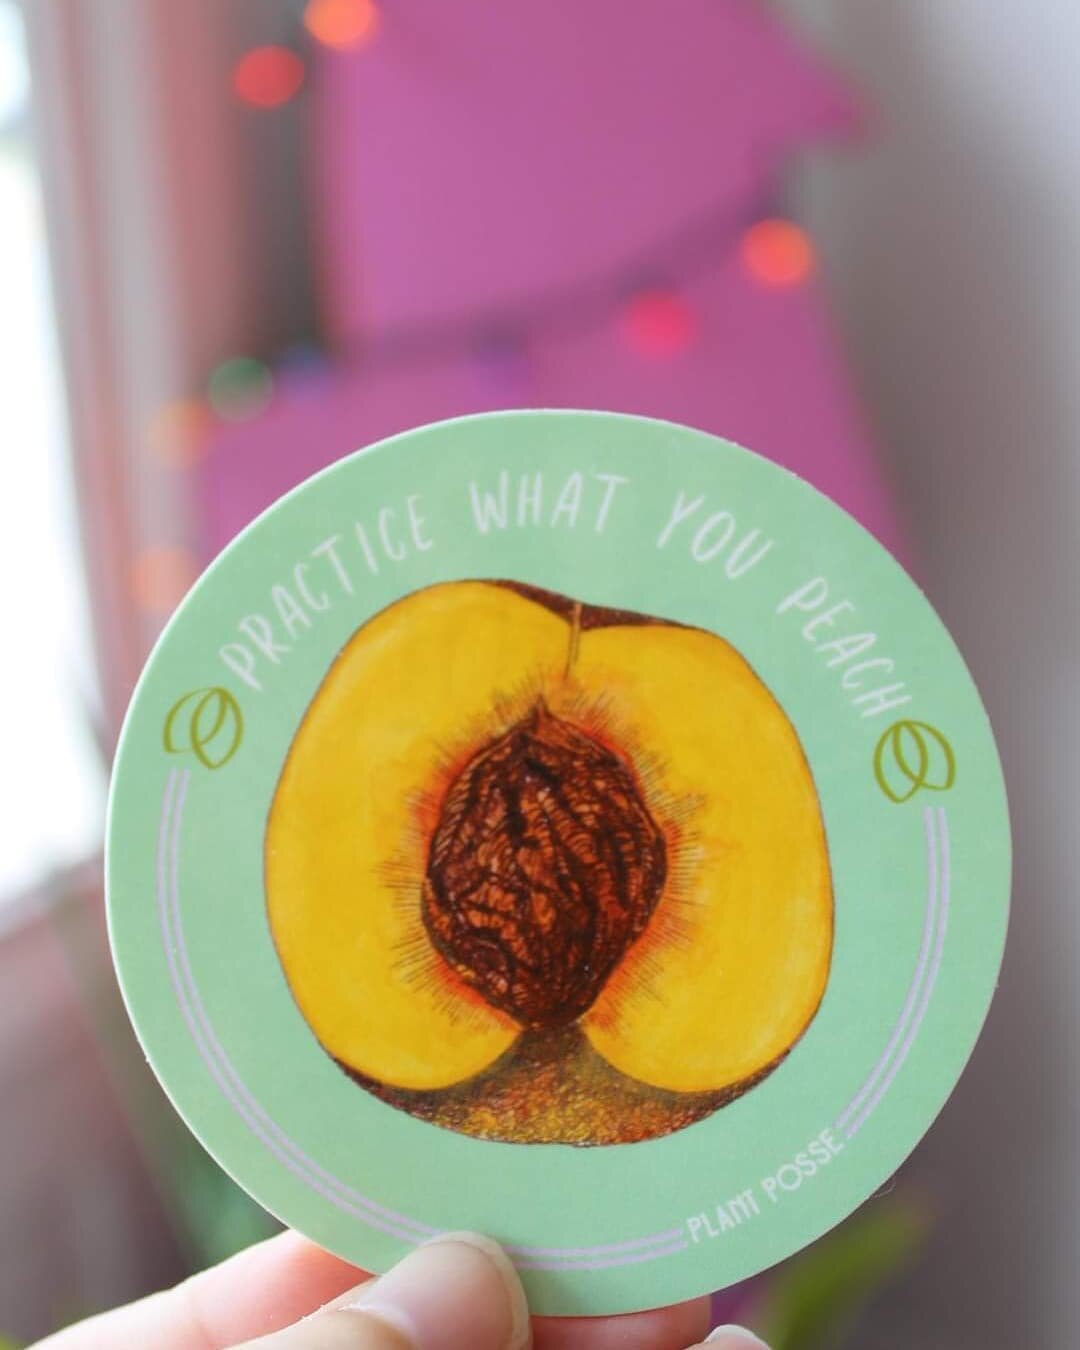 Saw this 🍑 sticker at Field Botanicals &amp; it had to be mine 🍑

Hey, we're celebrating at Field next week - come join us! Here's 👇 what you can expect, according to the event description:

Welcome back and kick back! FIELD is having our first pa